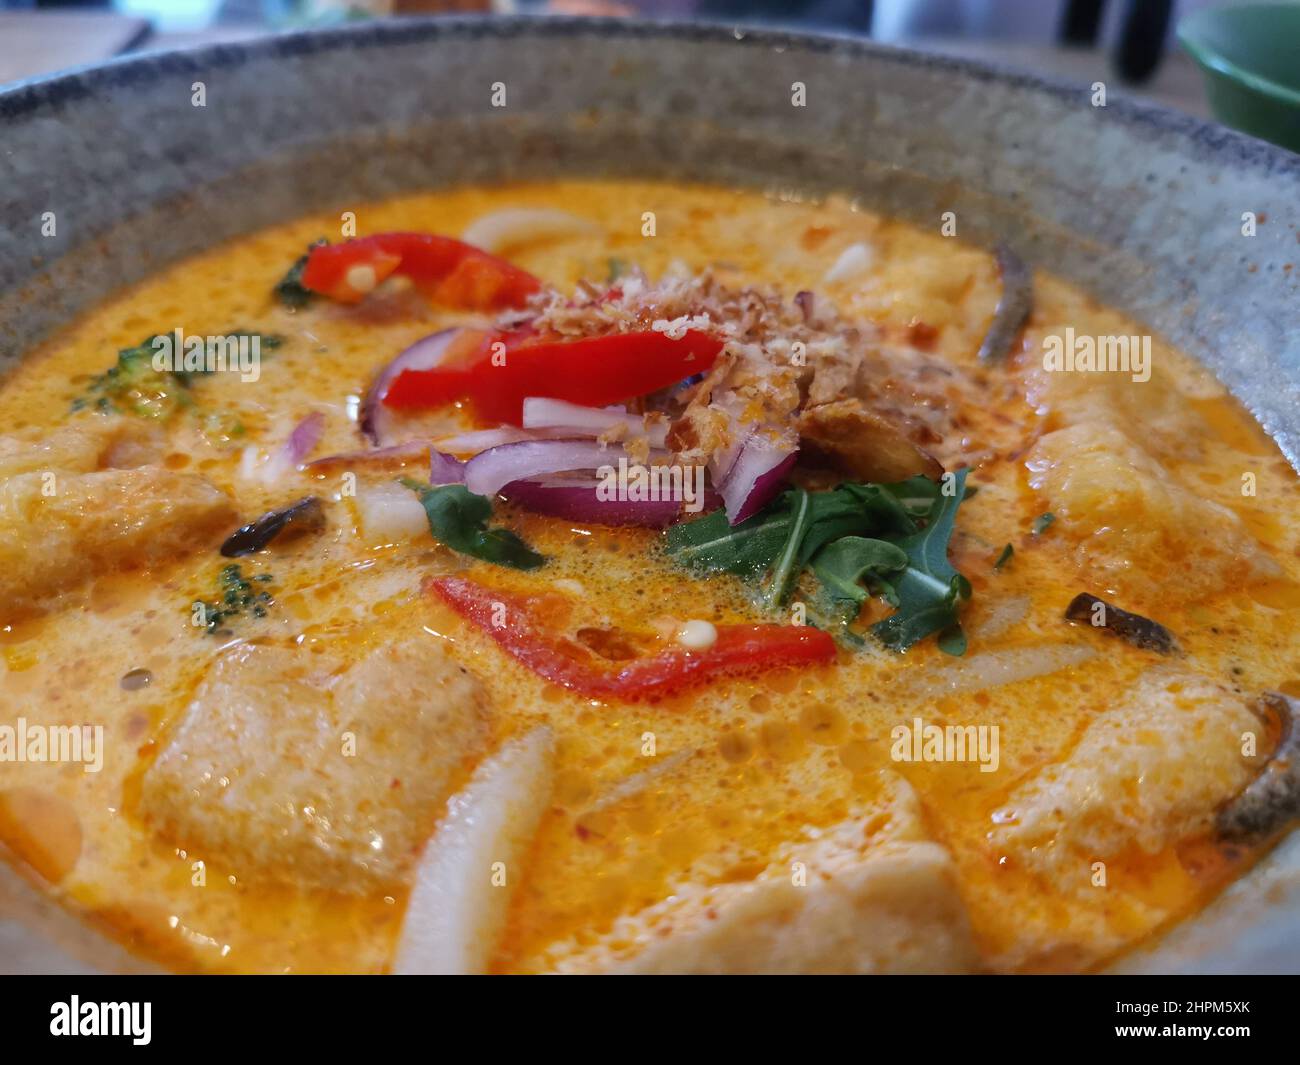 Delicious looking dish of Thai soup with tofu garnished with chillies Stock Photo